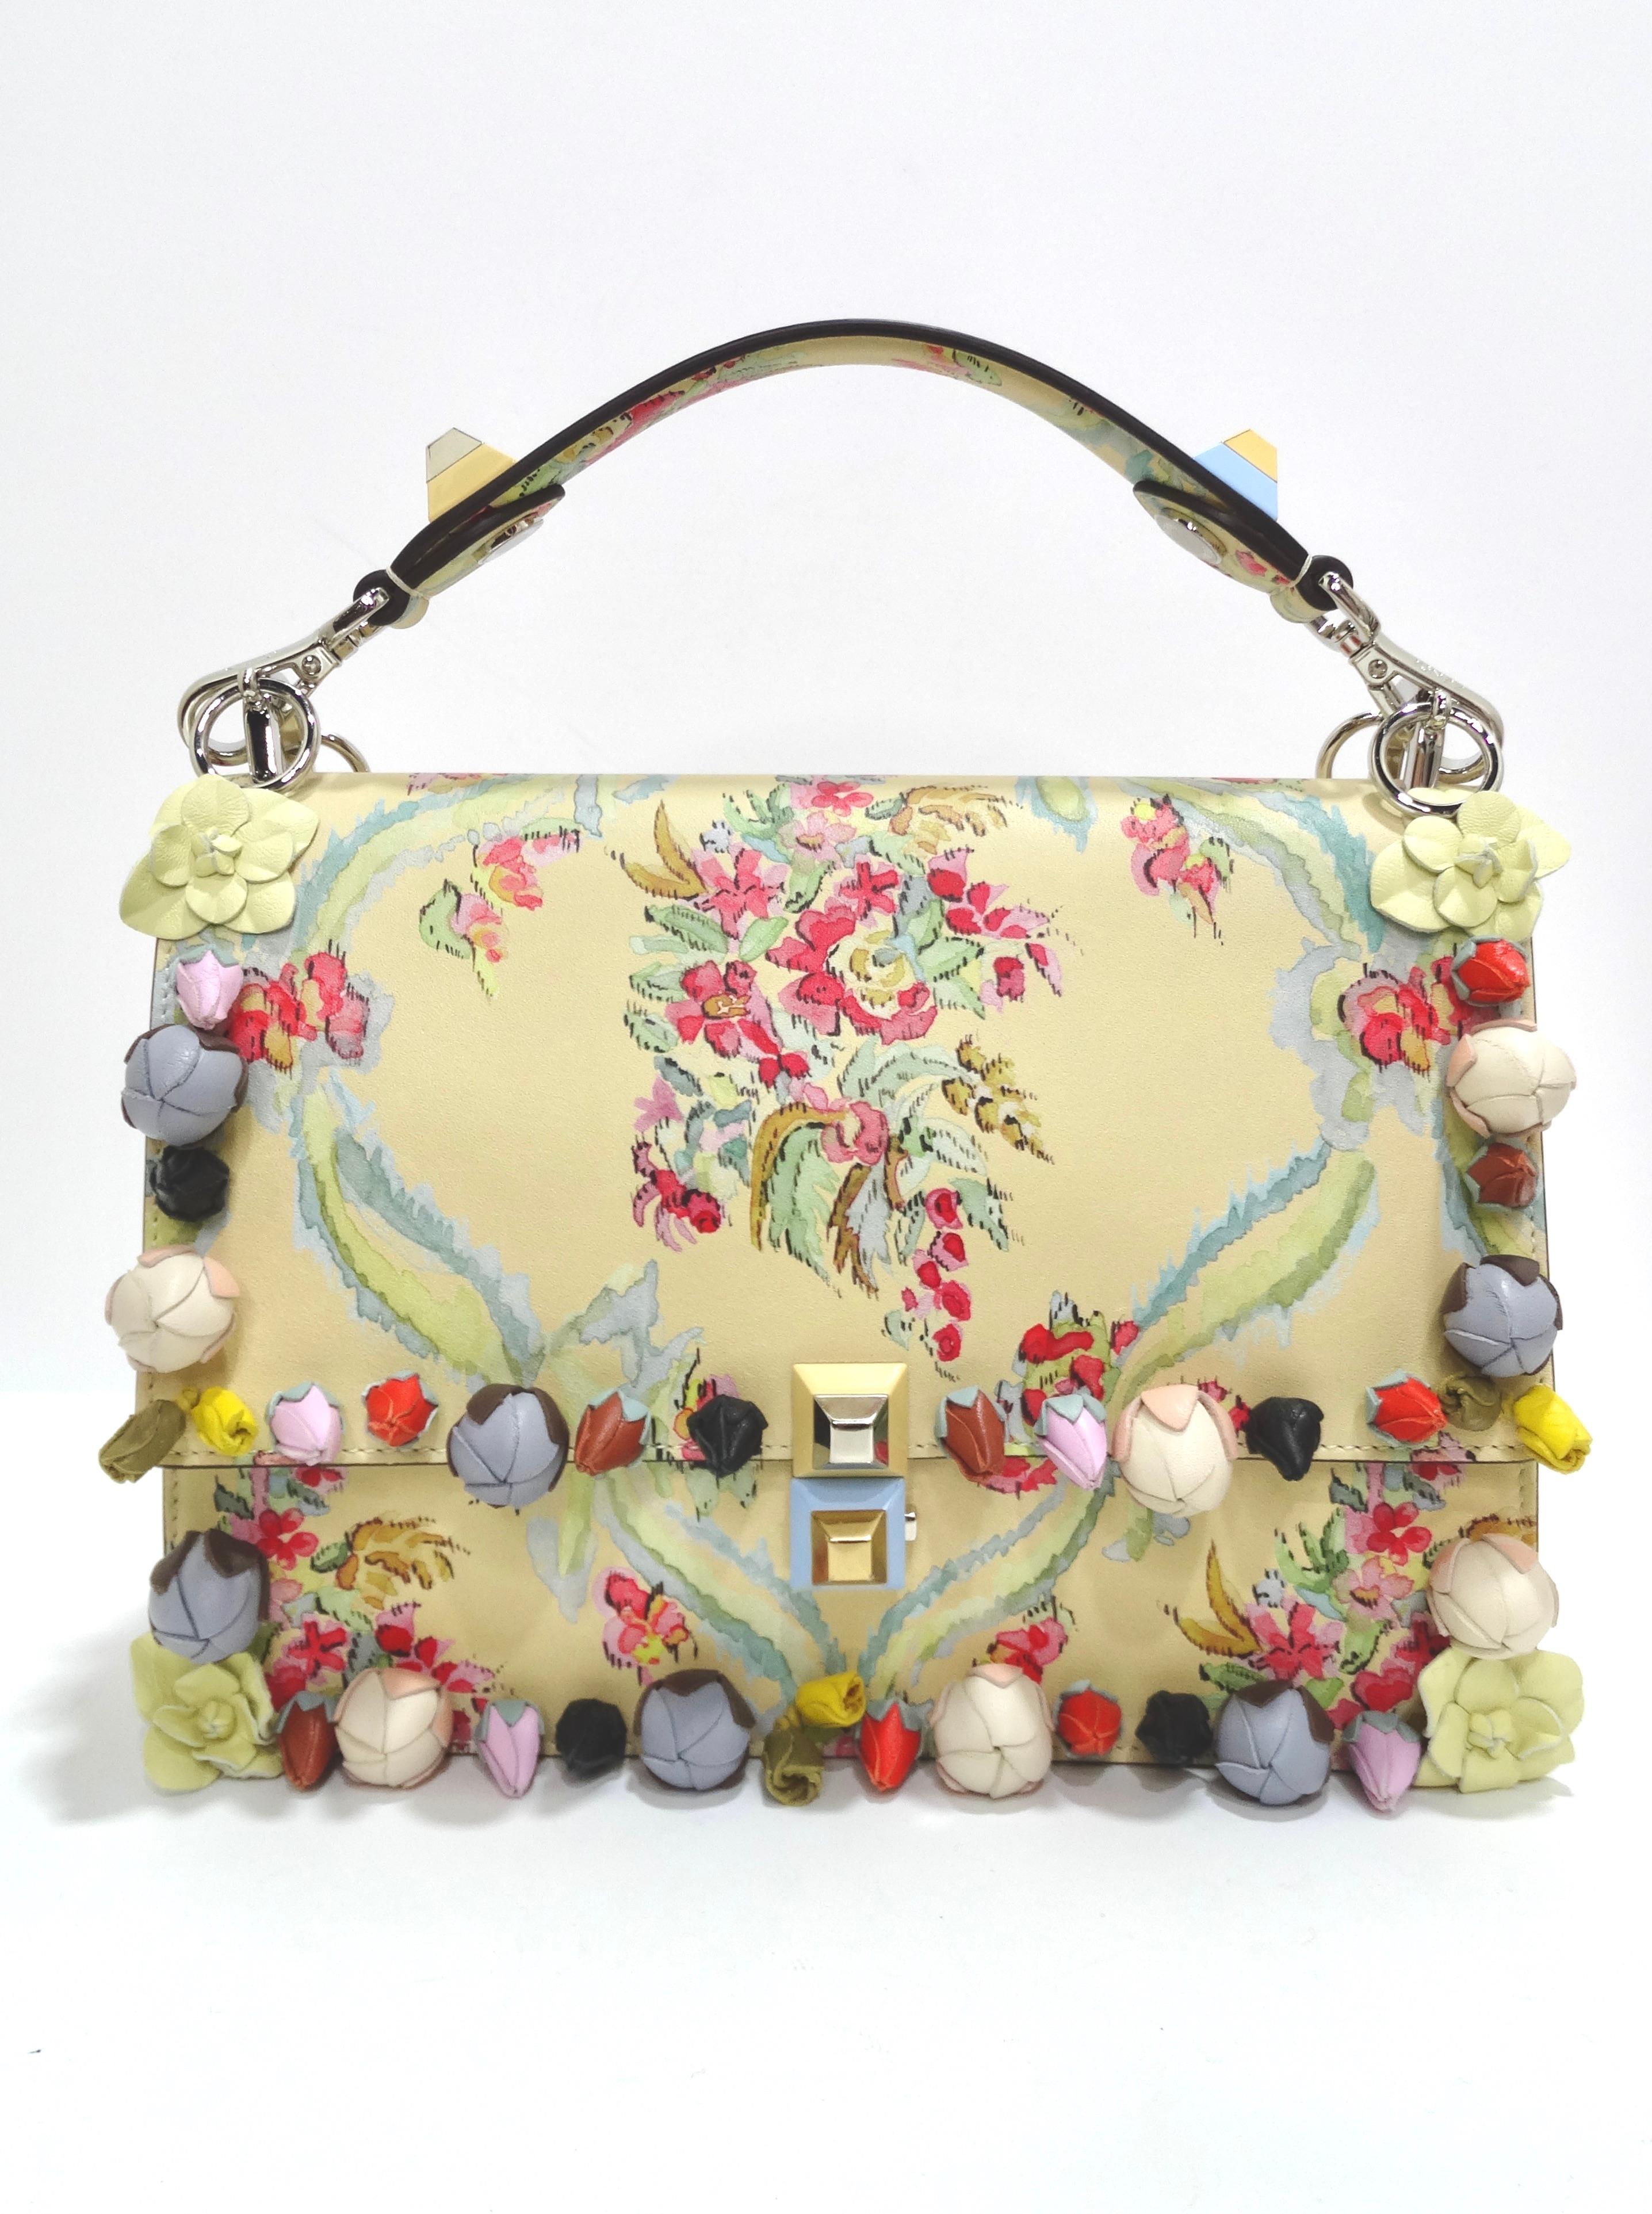 This Fendi bag is crafted of smooth calfskin leather in cream and floral-print leather with floral appliqués and signature pyramid studs at the removable top handle and front flap closure. Comes with a crossbody strap as well. The bag opens to a